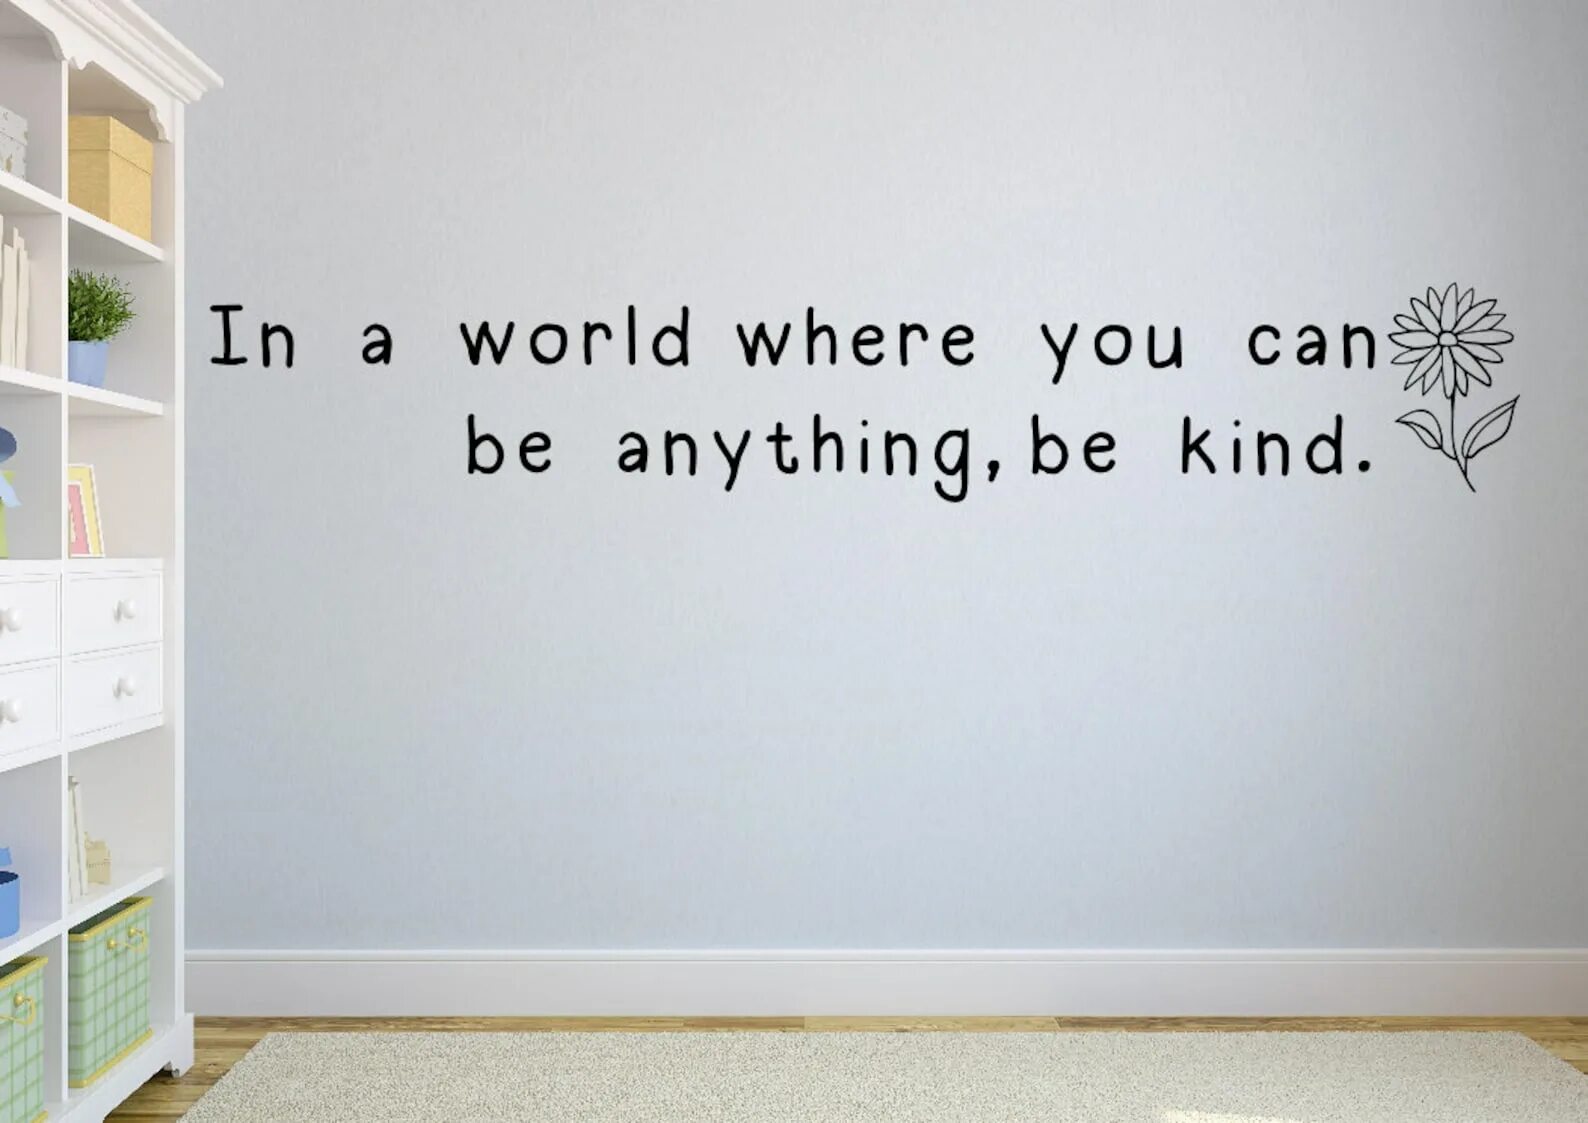 In a World where you can be anything be kind. Be kind картинка. Be kind обои серые. Be kind пикселями. Be kind слова